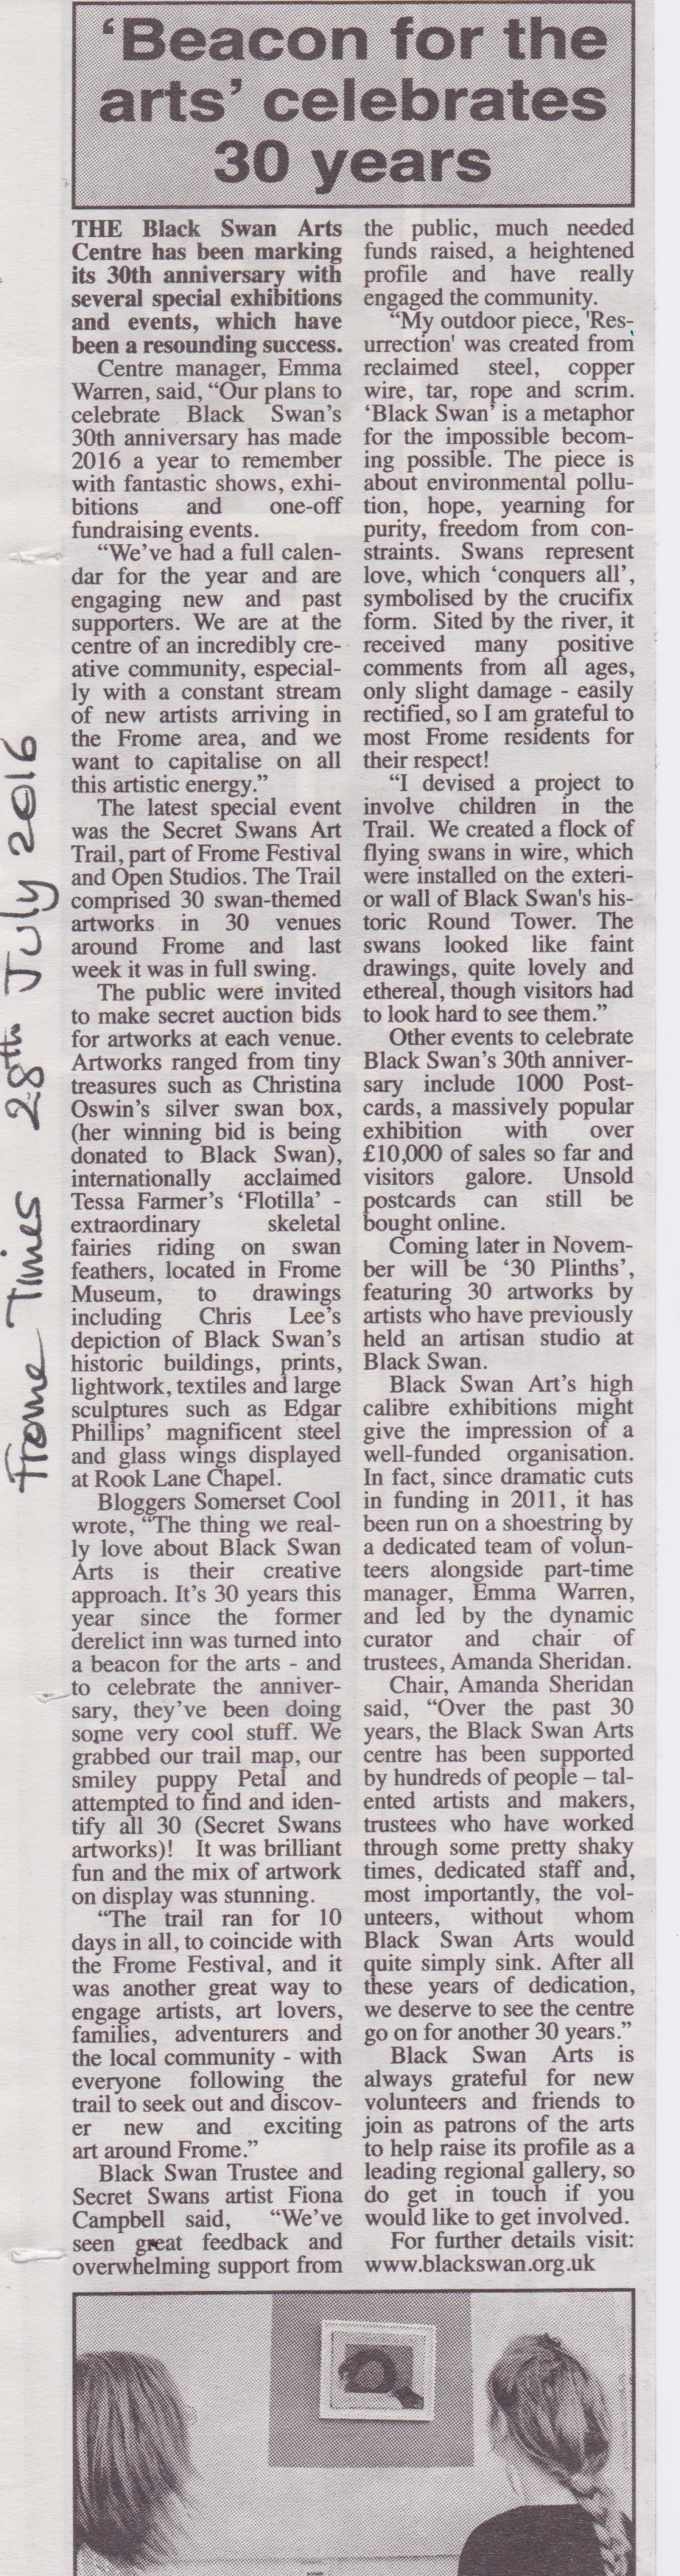 Black Swan - Beacon for the Arts - Frome Times 28:8:16